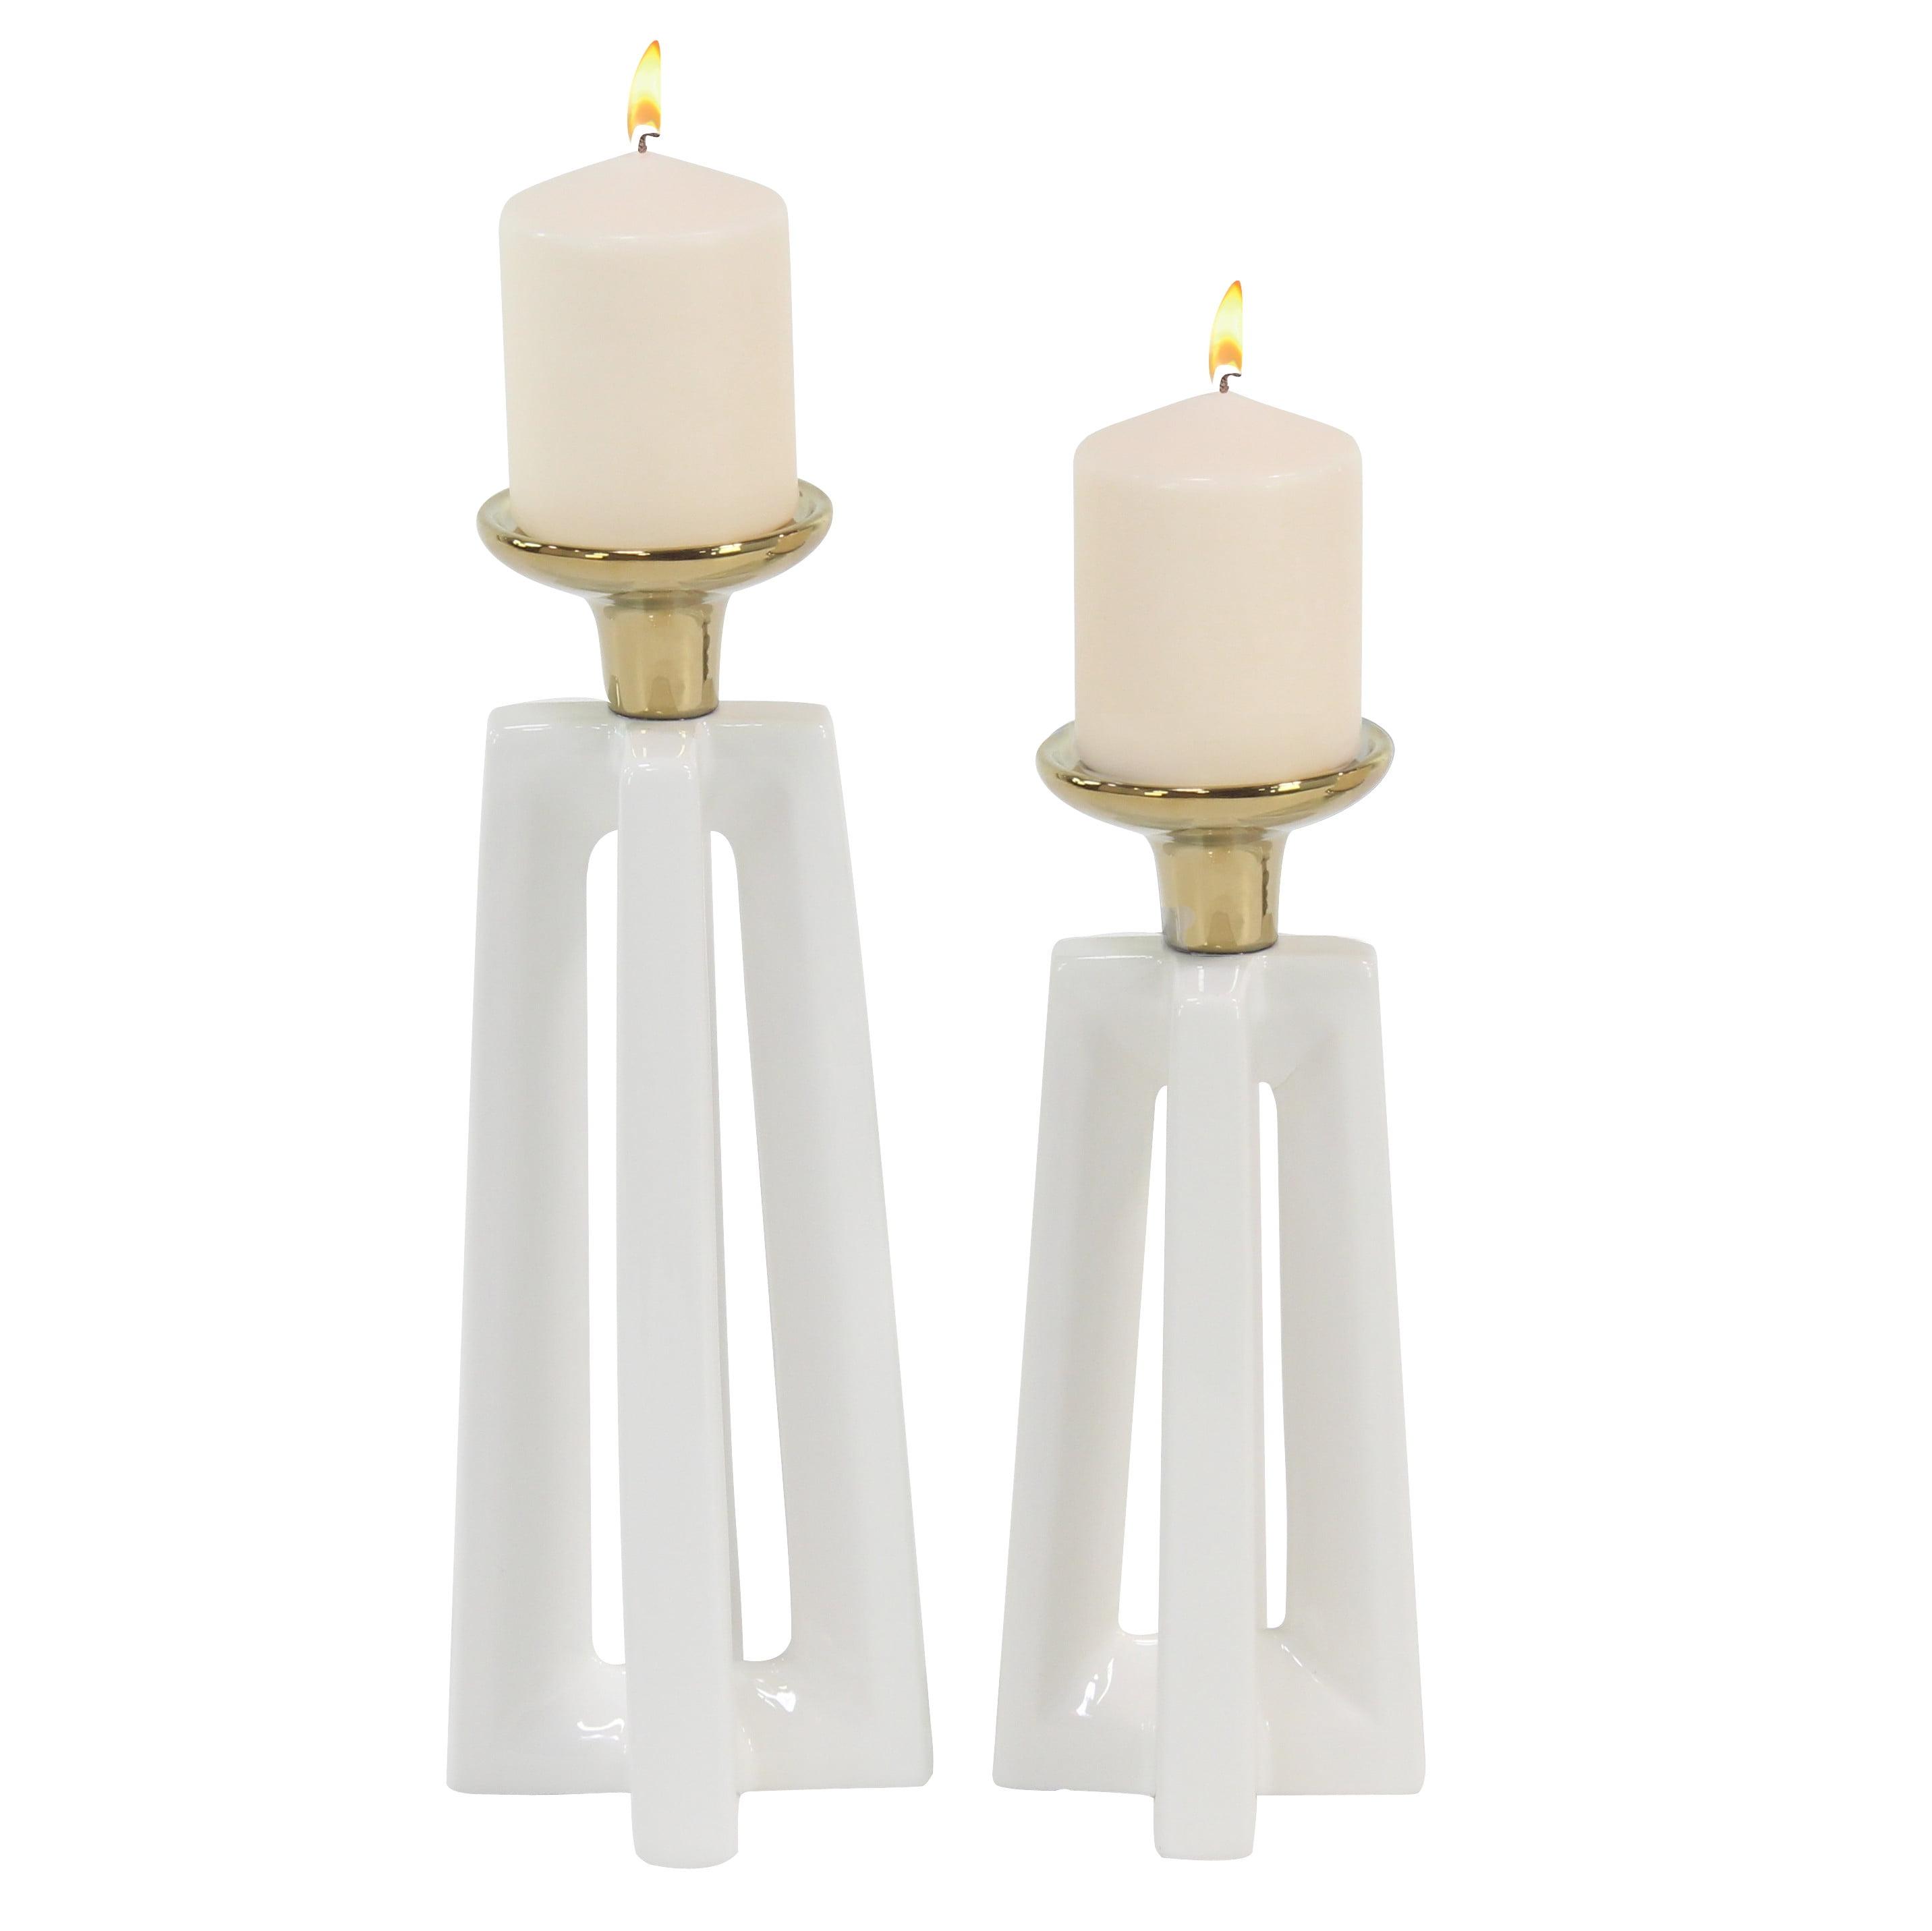 Elegant White Ceramic X-Shaped Candle Holder Set with Gold Accents